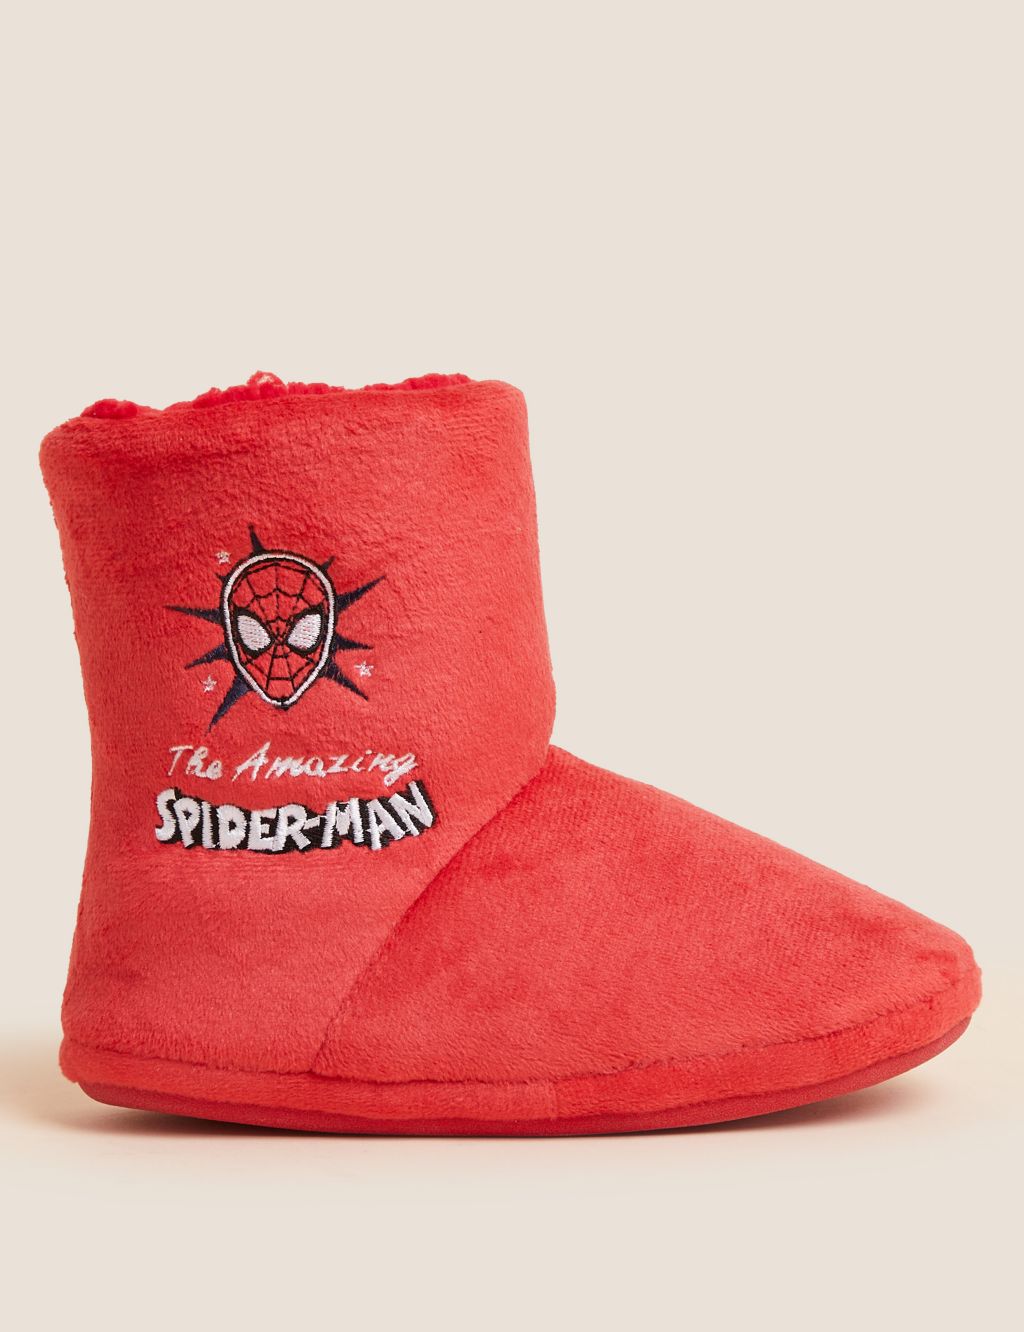 Kids' Spider-Man™ Slipper Boots (4 Small - 13 Small) image 1